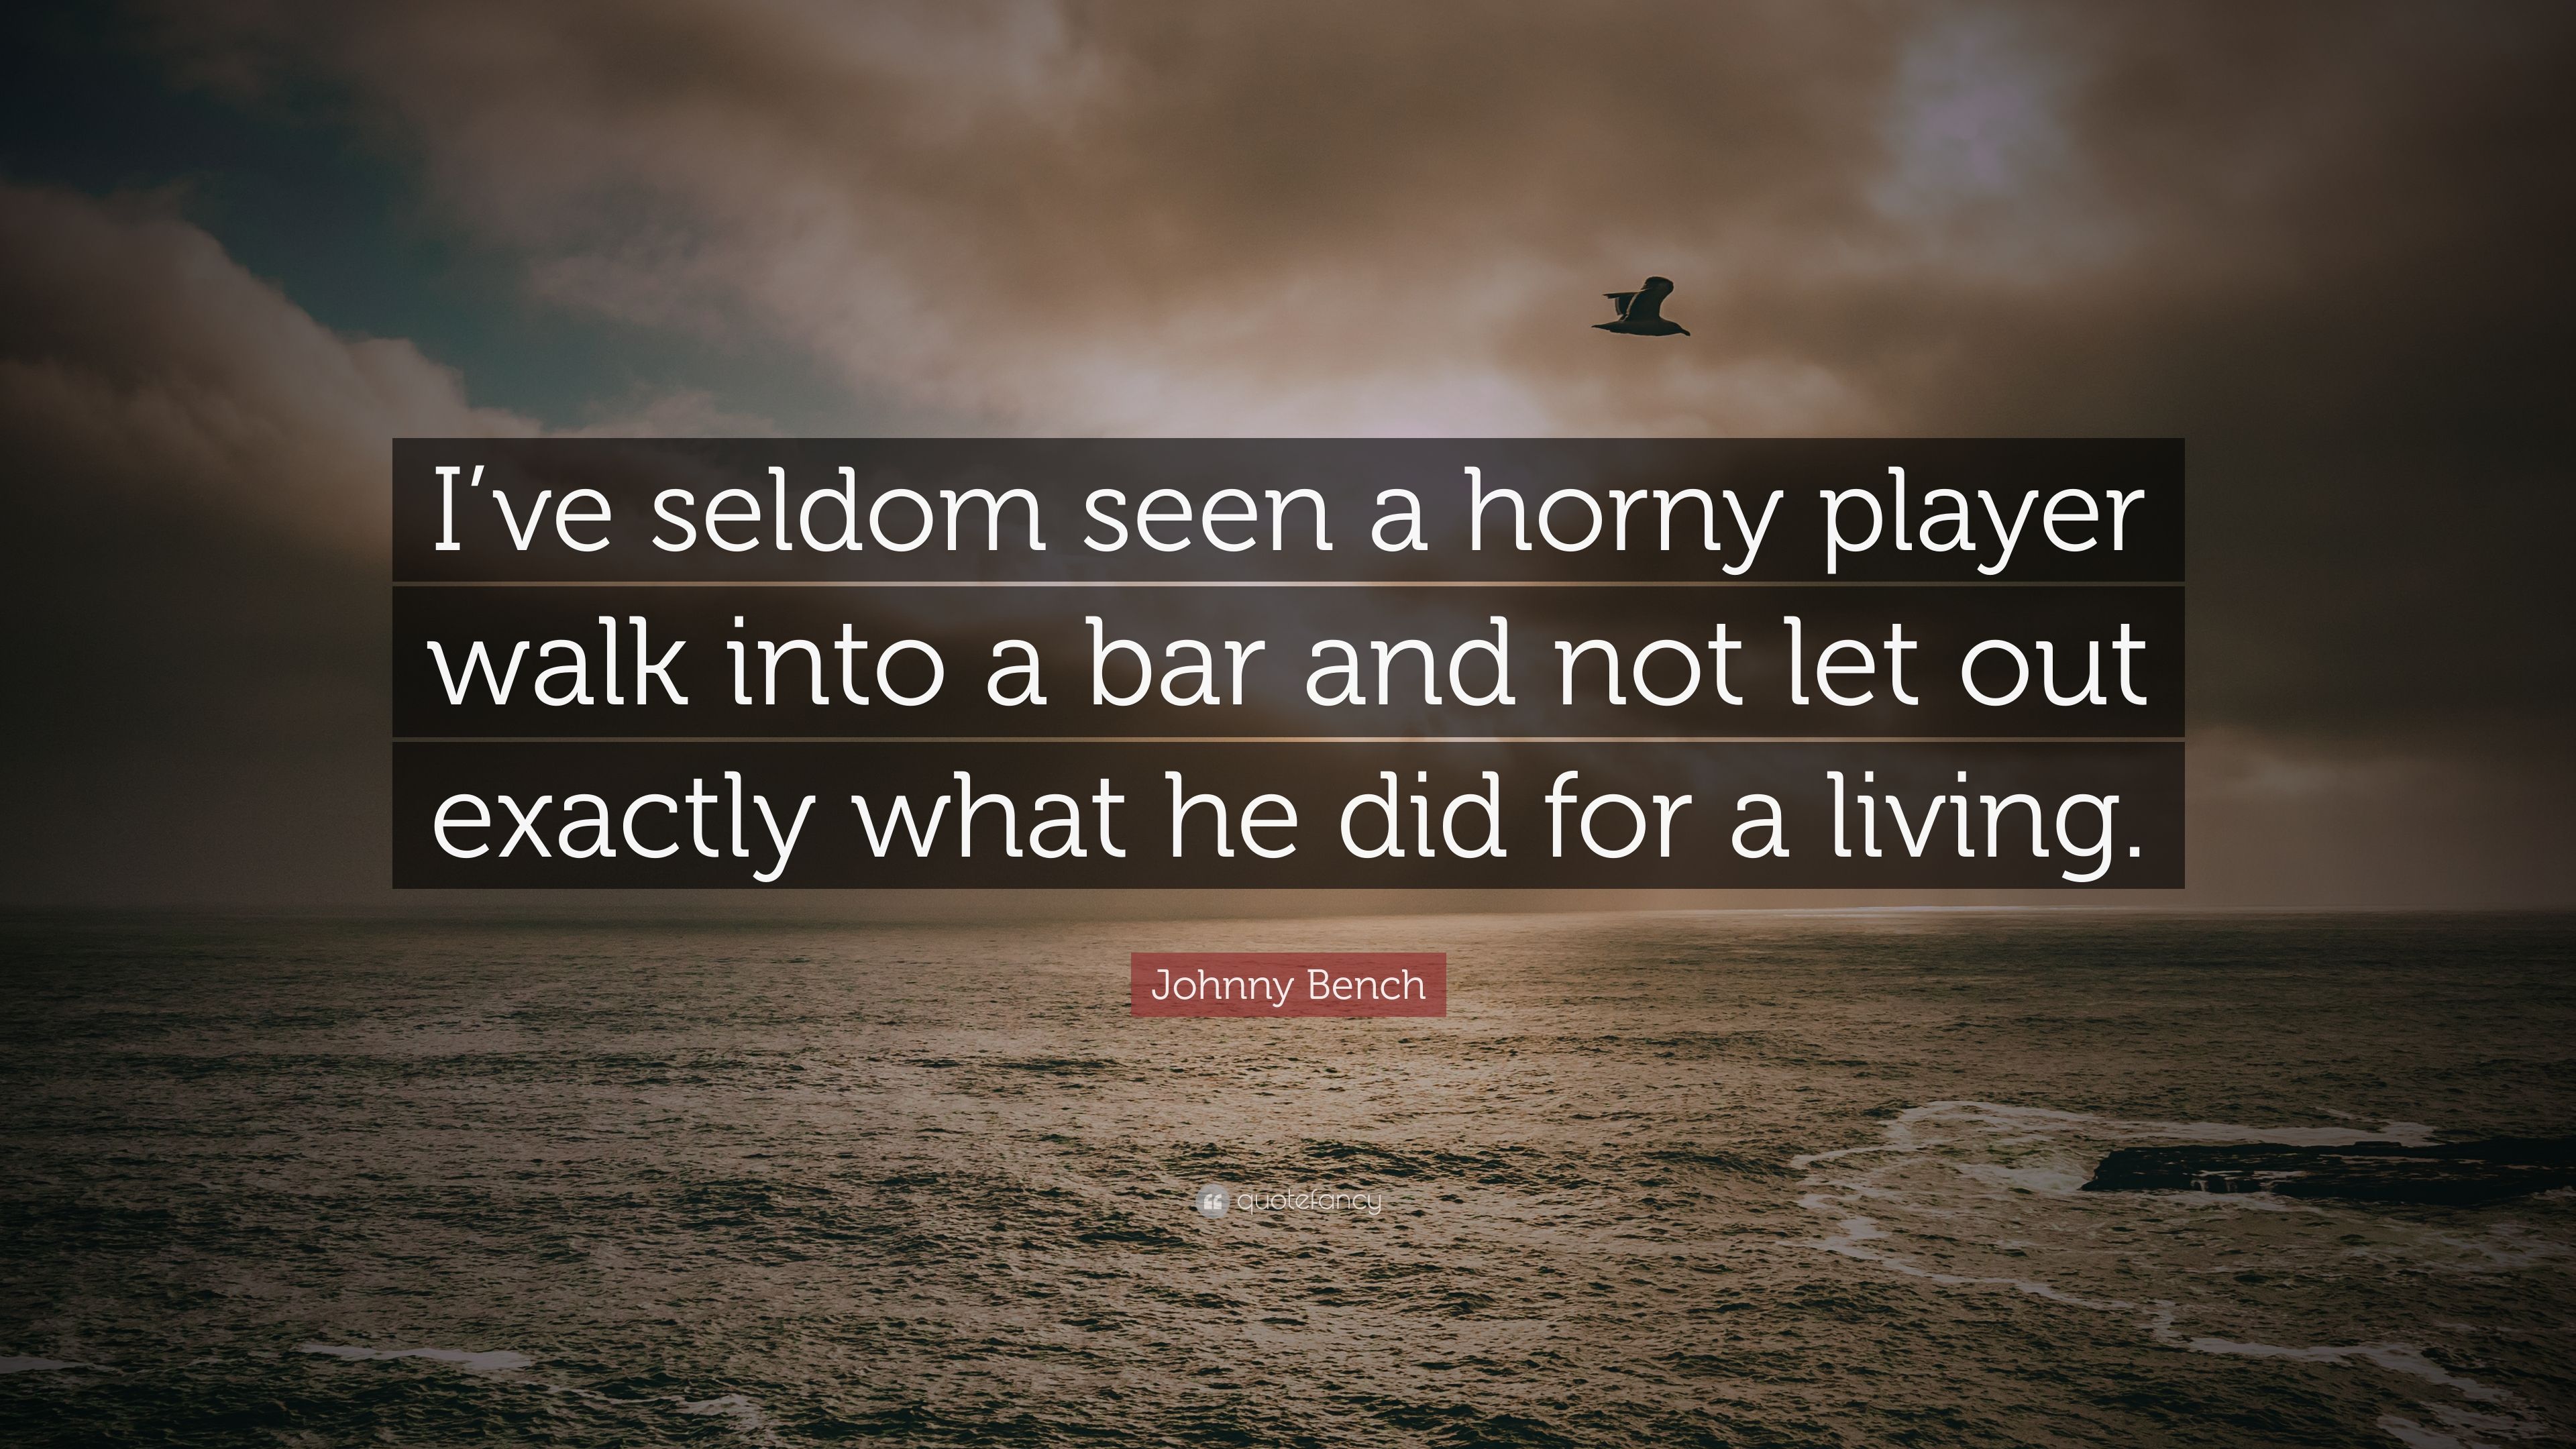 Johnny Bench Quote: “I've seldom seen a horny player walk into a